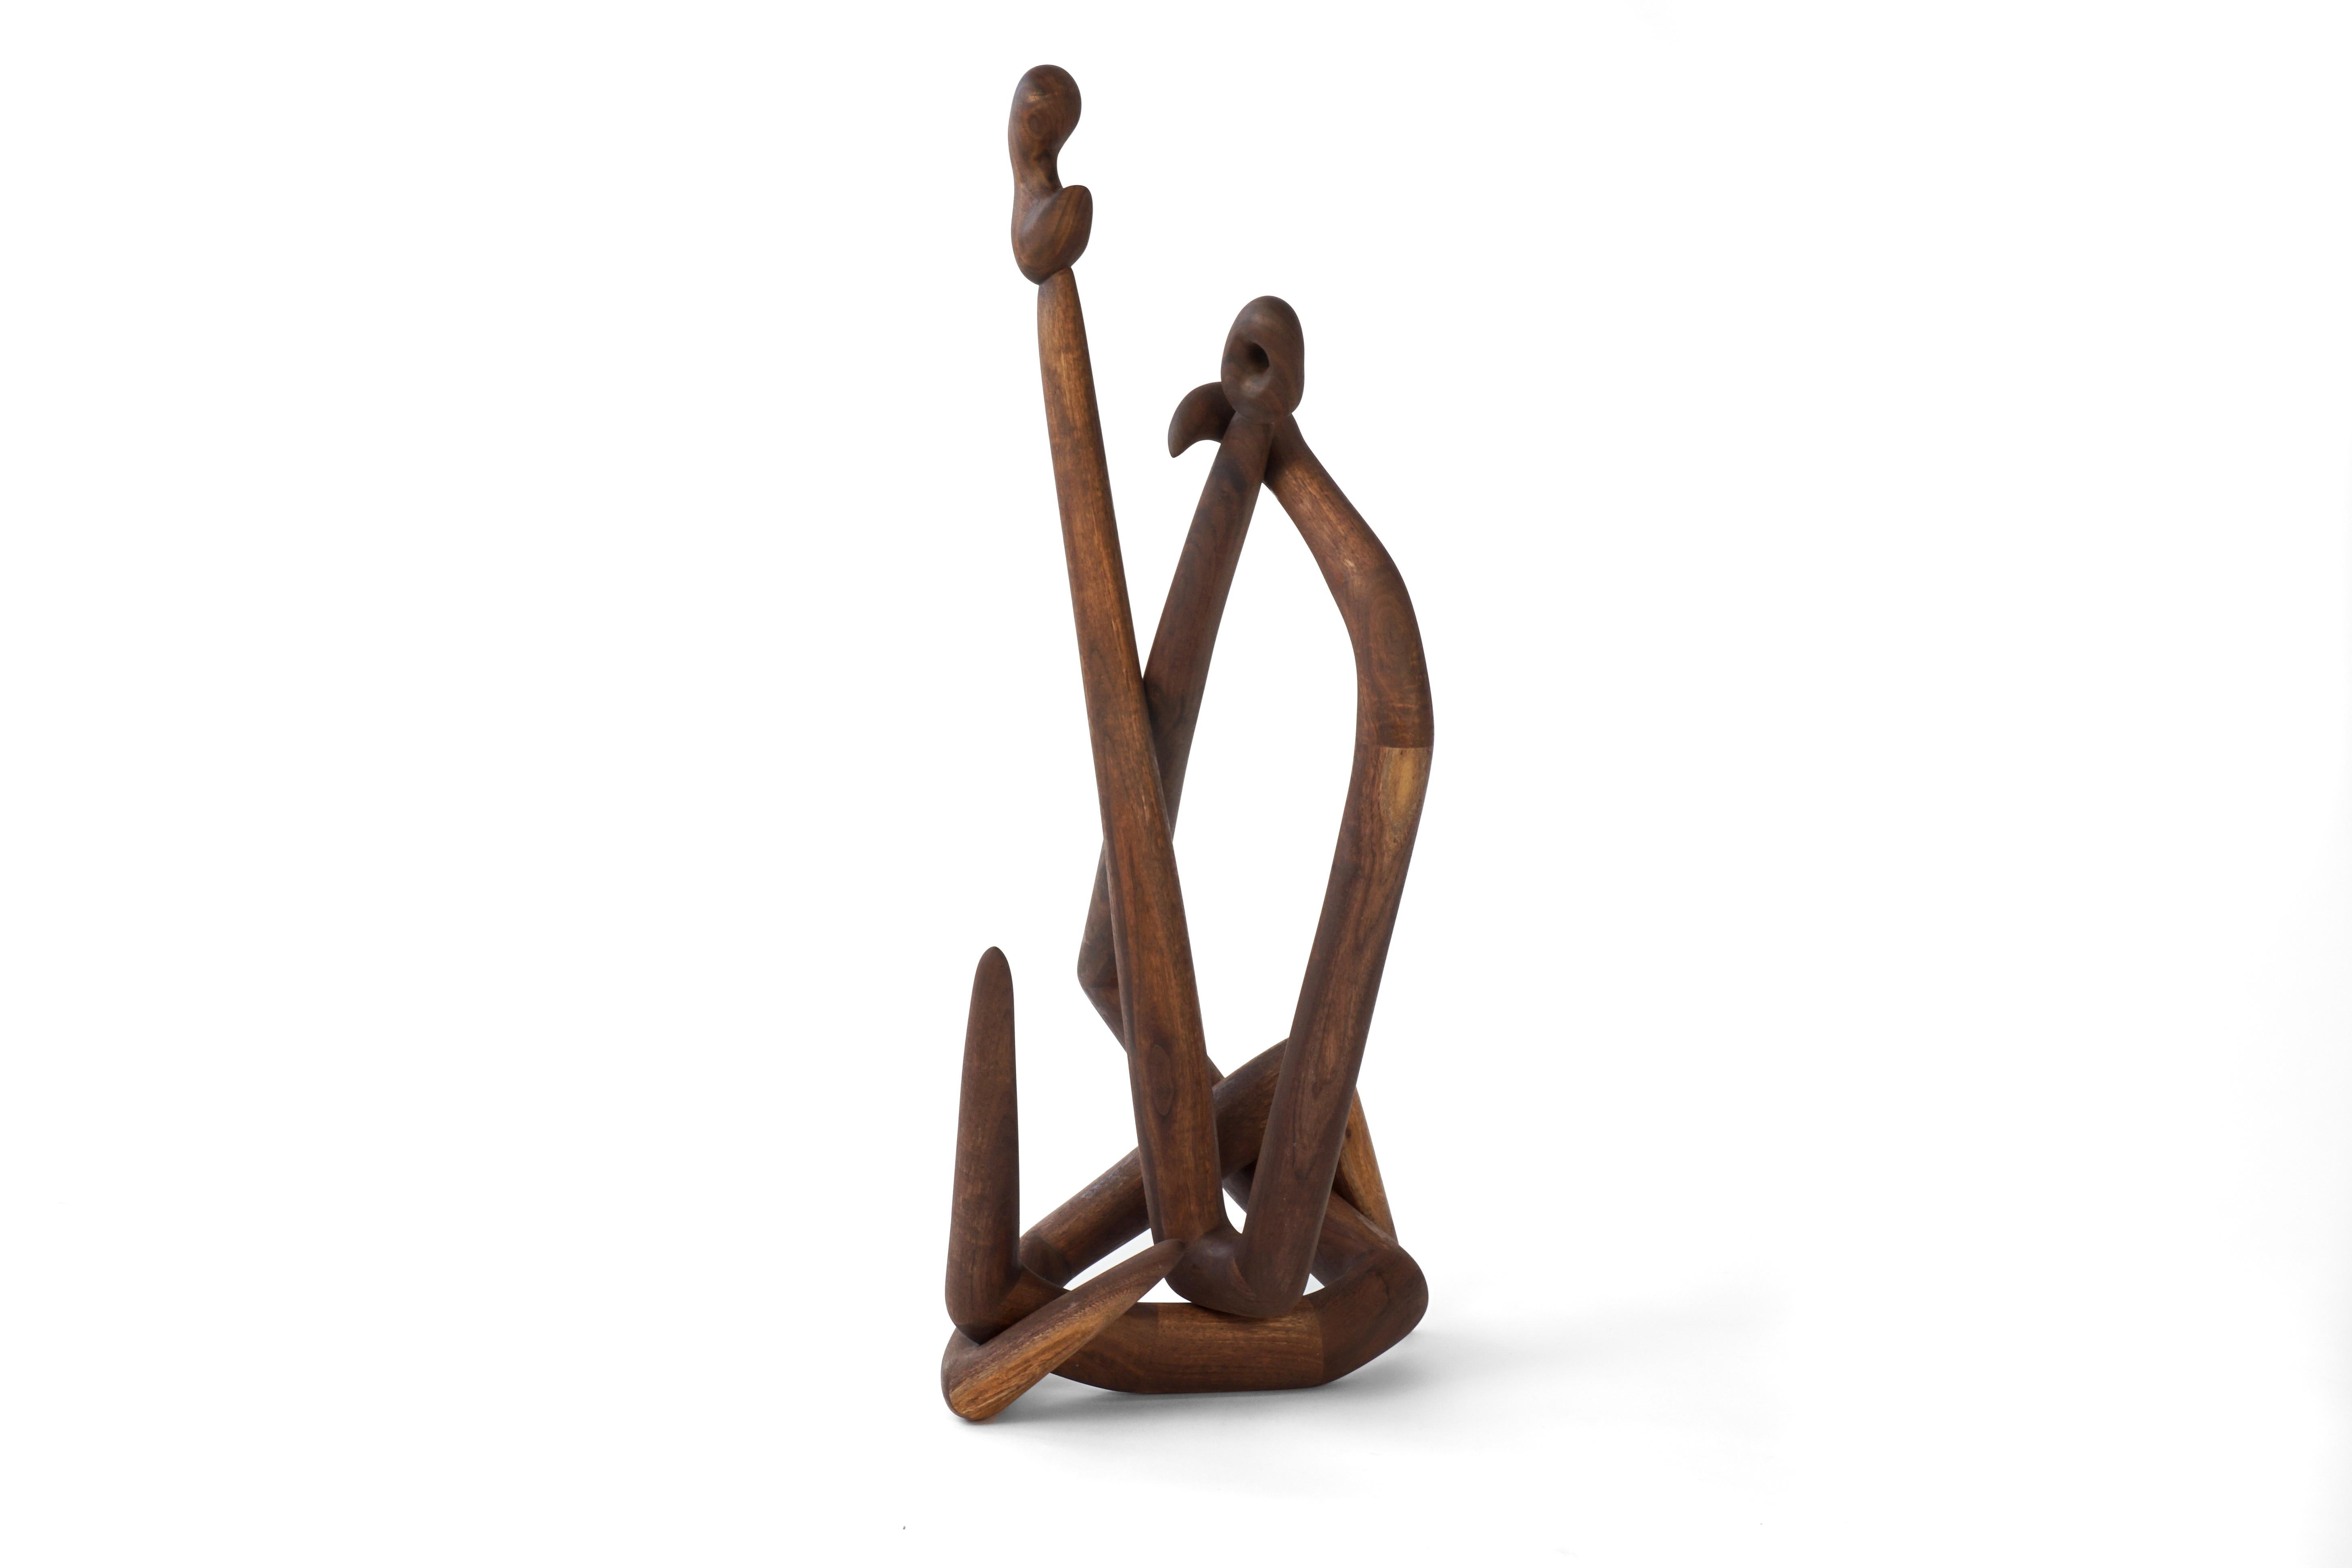 Jared Abner Abstract Sculpture - Suspension 11